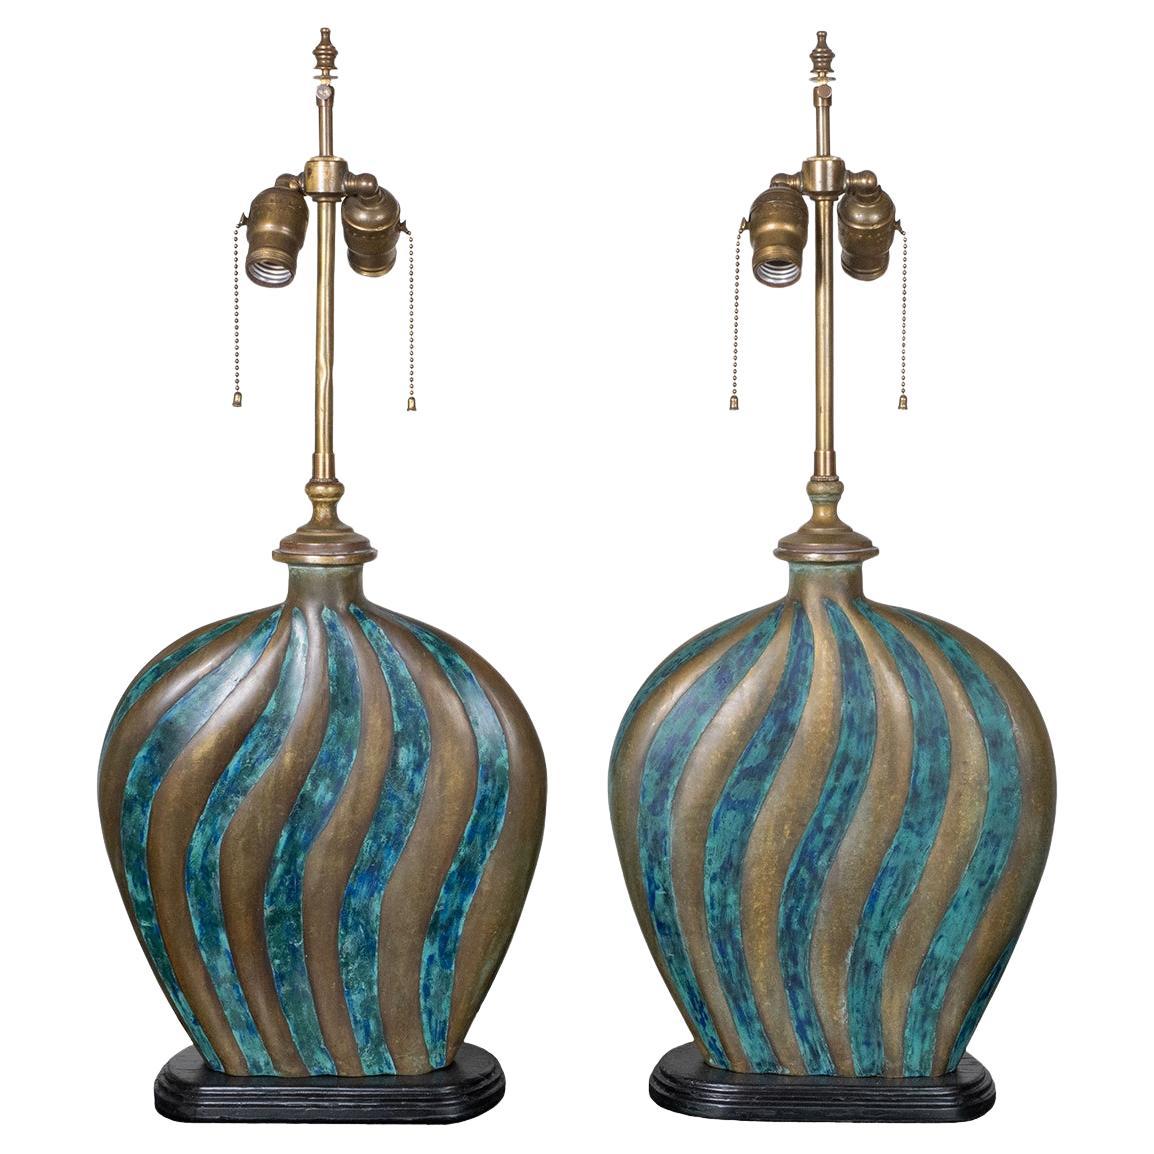 Pair of rare bronze table lamps by Pepe Mendoza